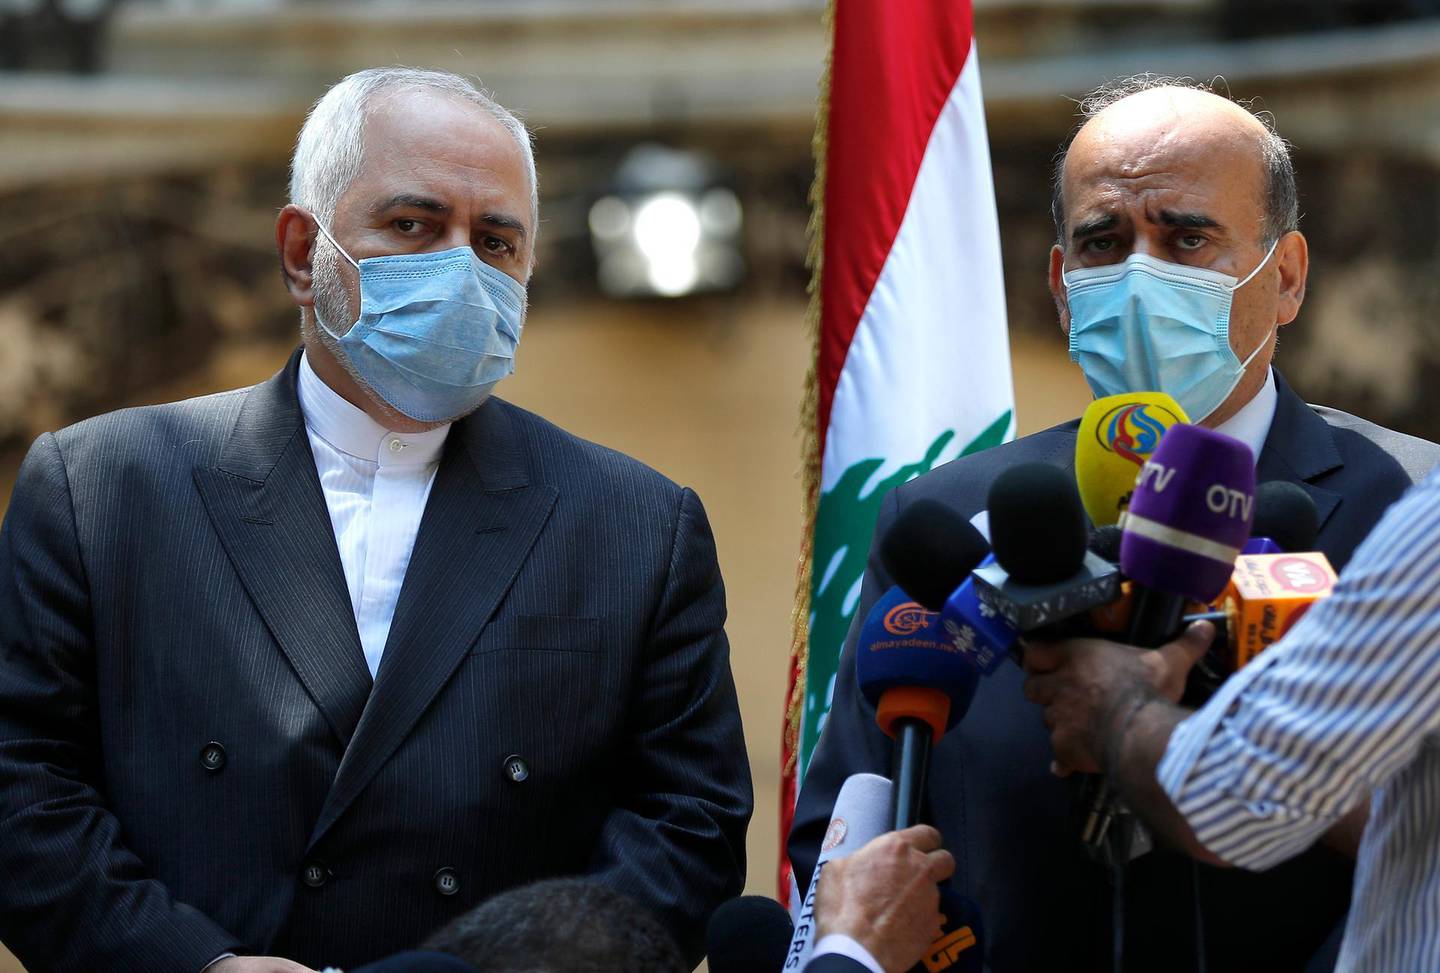 Lebanese Foreign Minister Charbel Wehbe, left, speaks during a joint press conference with his Iranian counterpart Mohammad Javad Zarif, outside the Lebanese foreign ministry damaged by last week's explosion that his the seaport of Beirut, Lebanon, Friday, Aug. 14, 2020. (AP Photo/Hussein Malla)